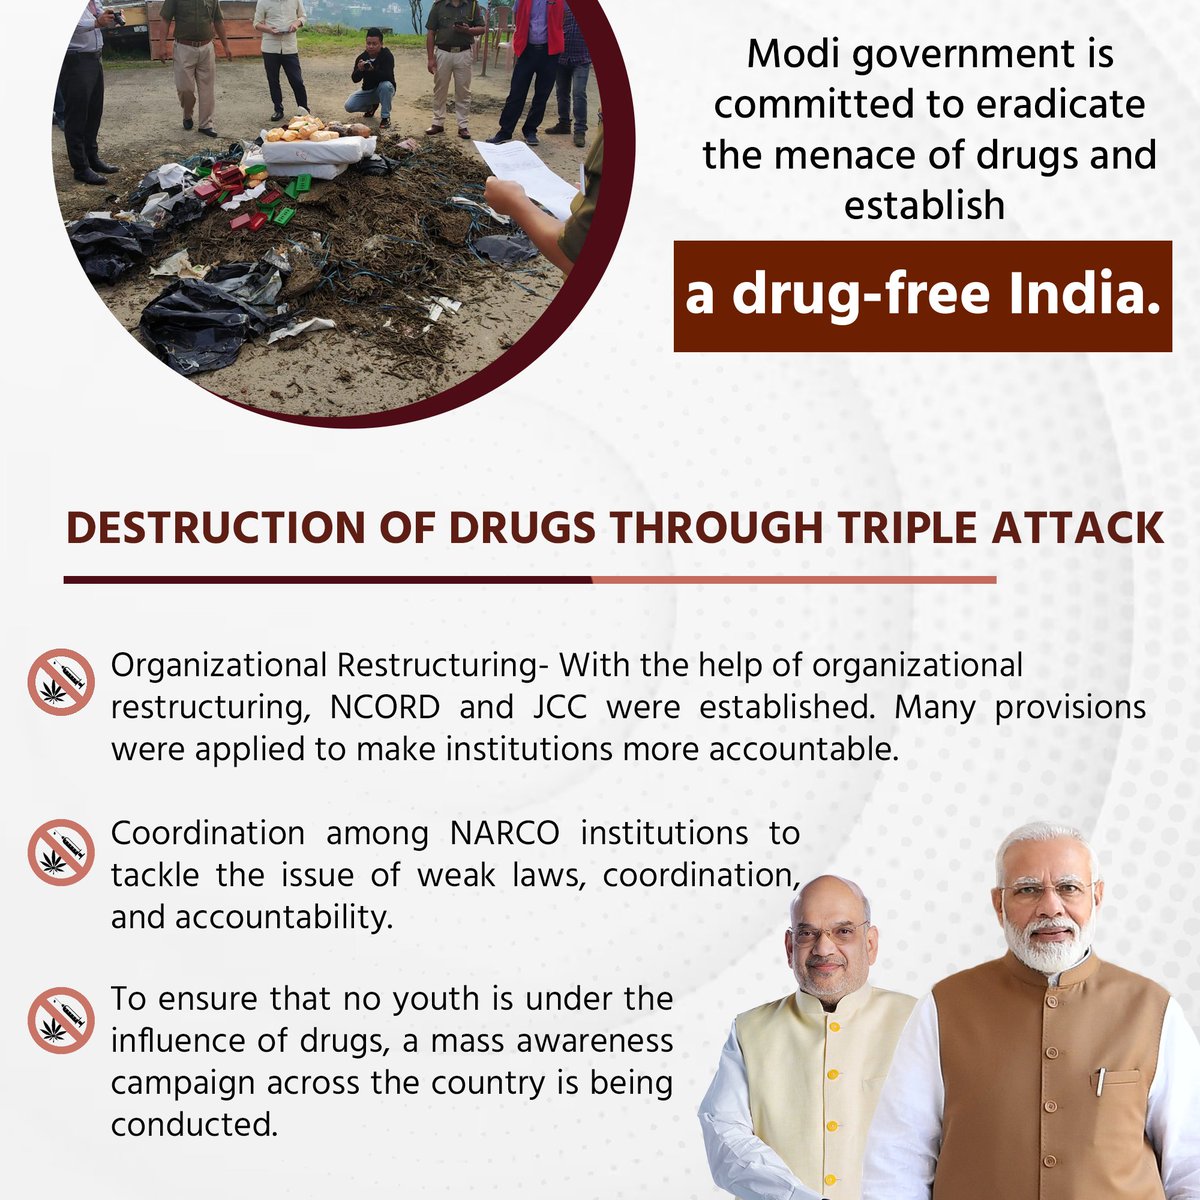 Government is committed to eradicate the menace of drugs and establish a drug-free India

#DrugsFreeBharat 
@SSB_INDIA @SSBFTRLUCKNOW @SSBSHQGKP @a_hemochandra